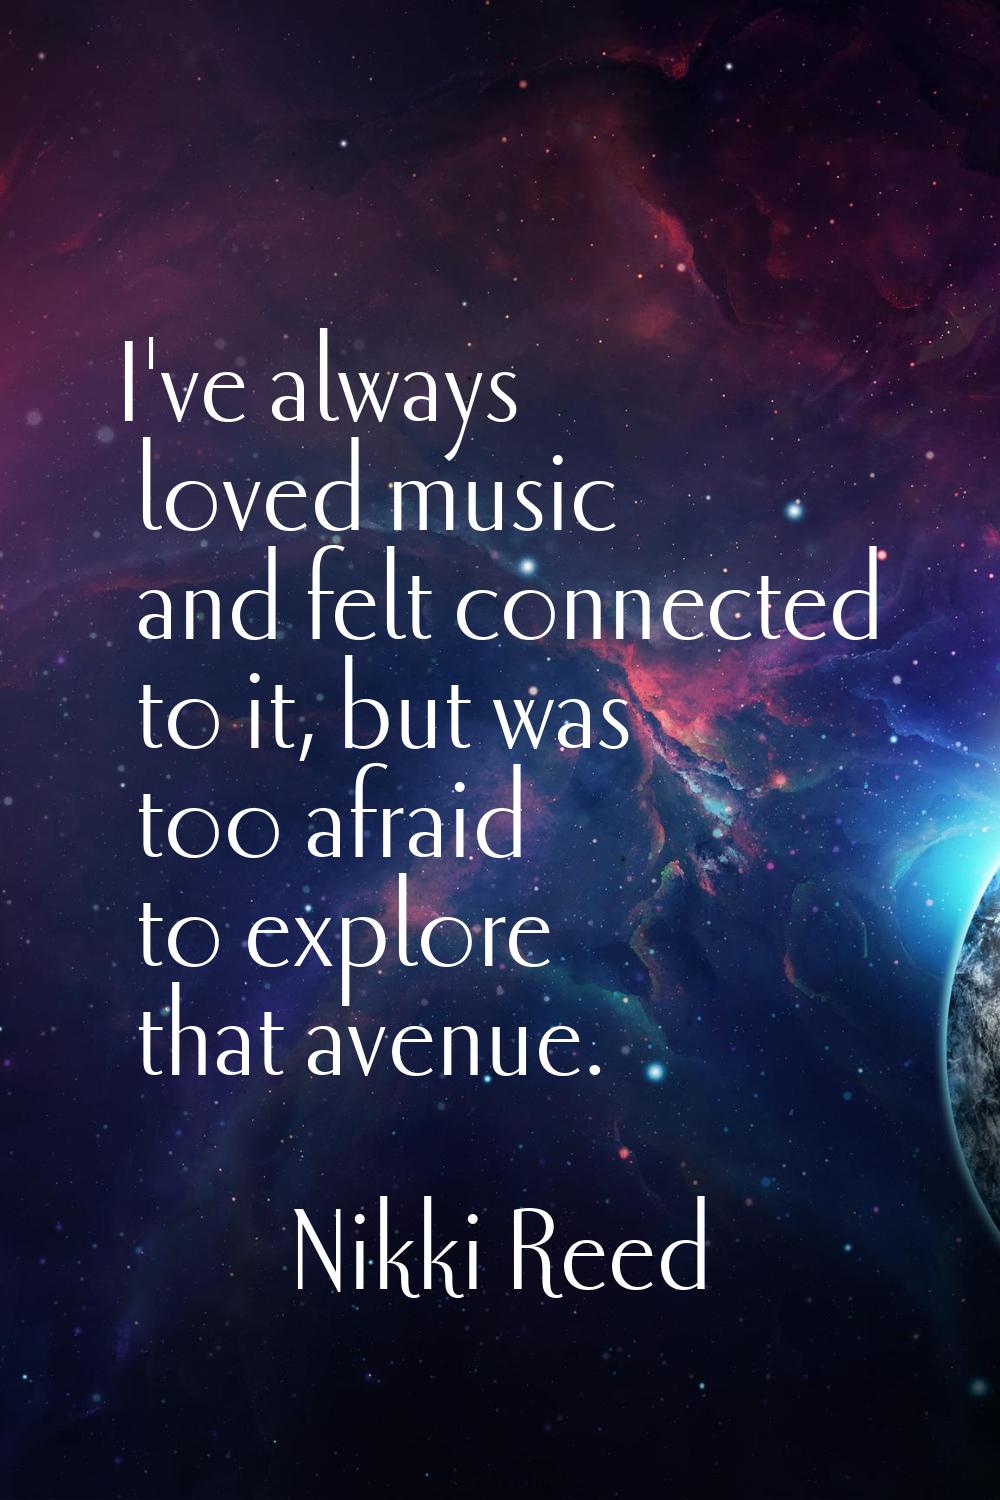 I've always loved music and felt connected to it, but was too afraid to explore that avenue.